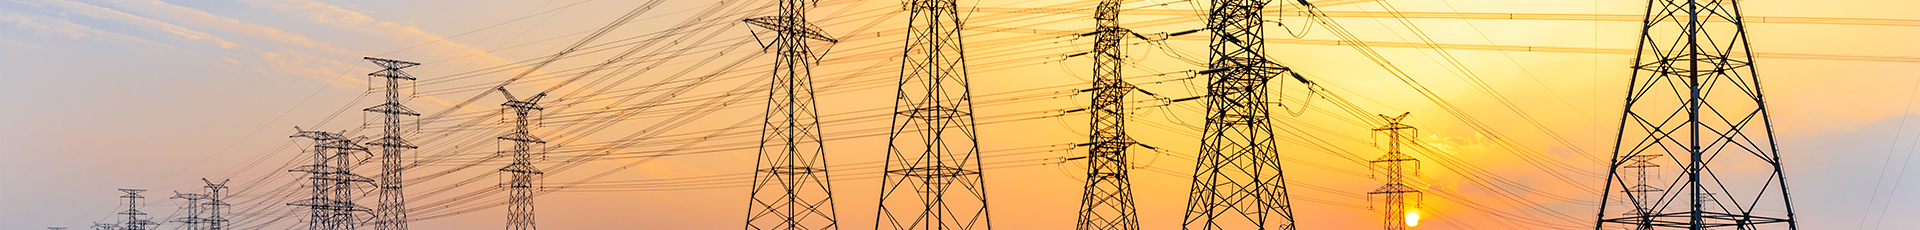 Asset monitoring for Power Transmission Towers